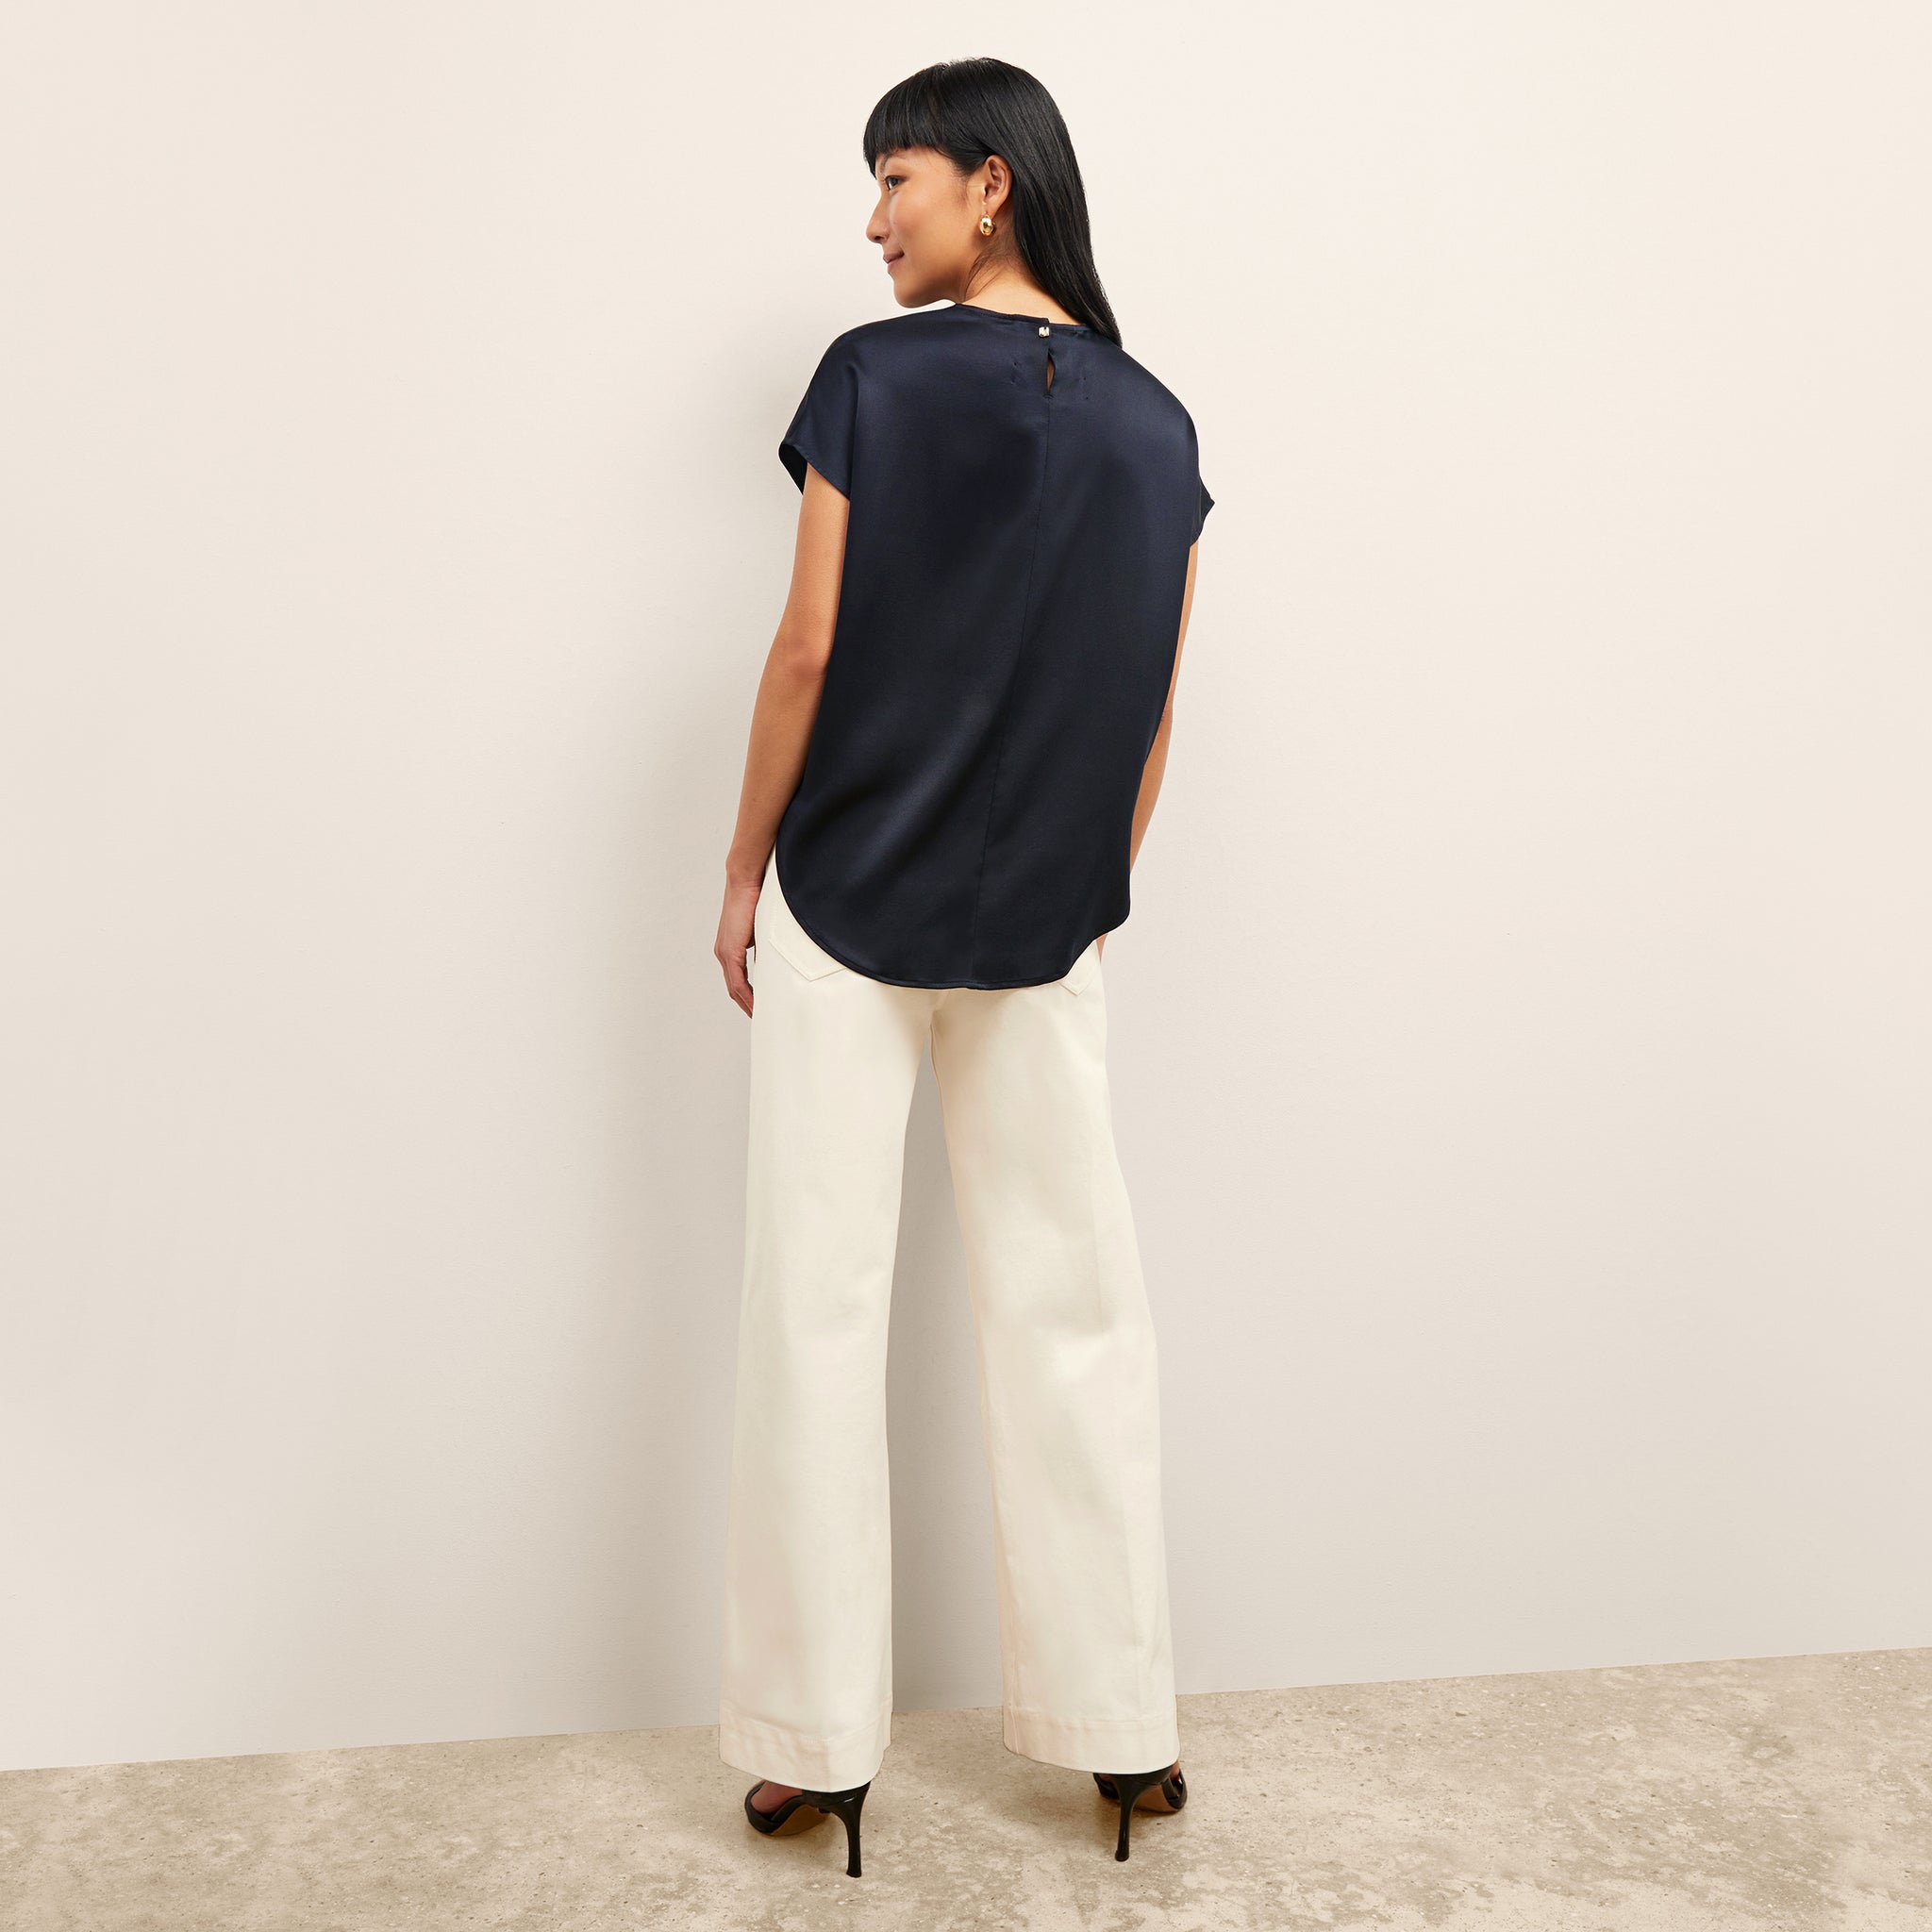 Back image of a woman wearing the Didion Top in Galaxy Blue